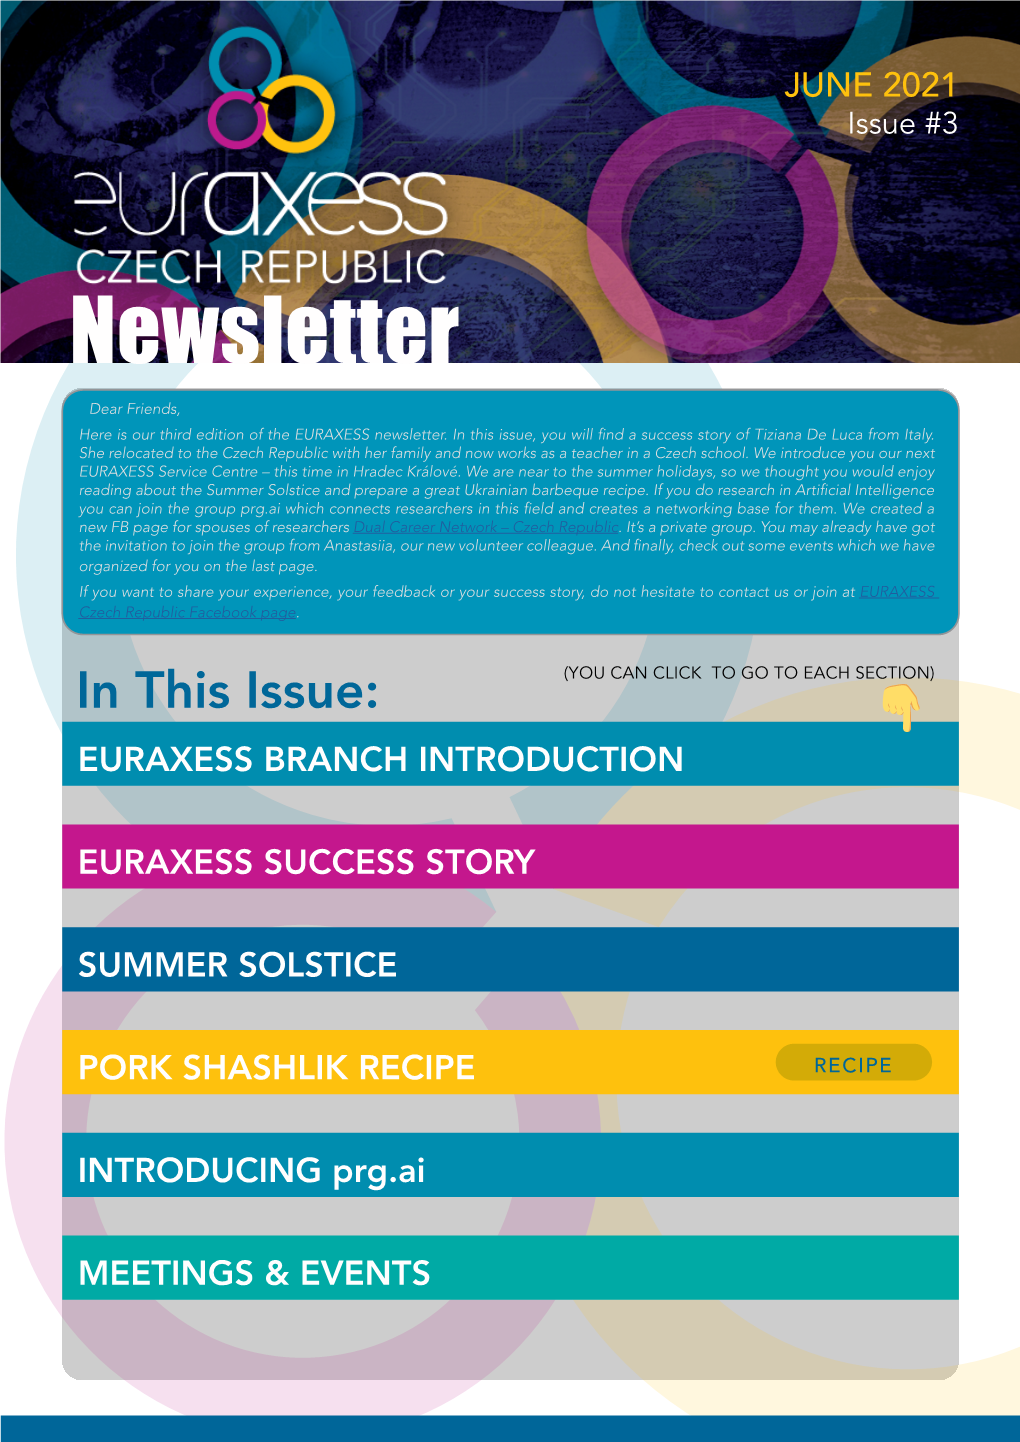 Newsletter Dear Friends, Here Is Our Third Edition of the EURAXESS Newsletter